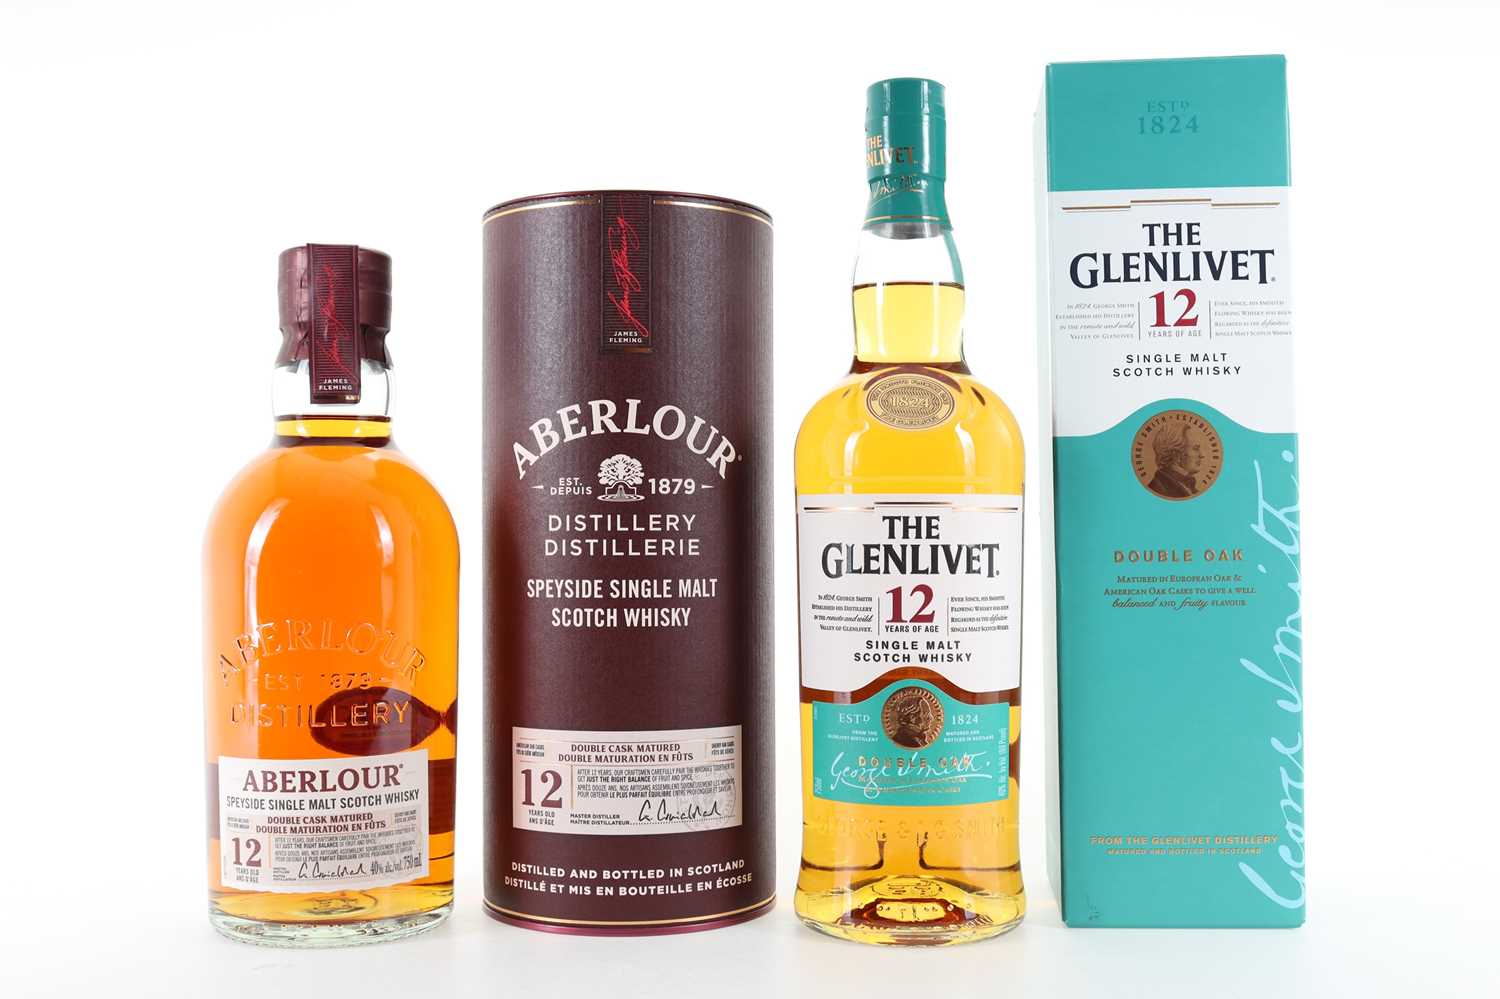 ABERLOUR 12 YEAR OLD 75CL AND GLENLIVET 12 YEAR OLD 75CL SPEYSIDE SINGLE MALT